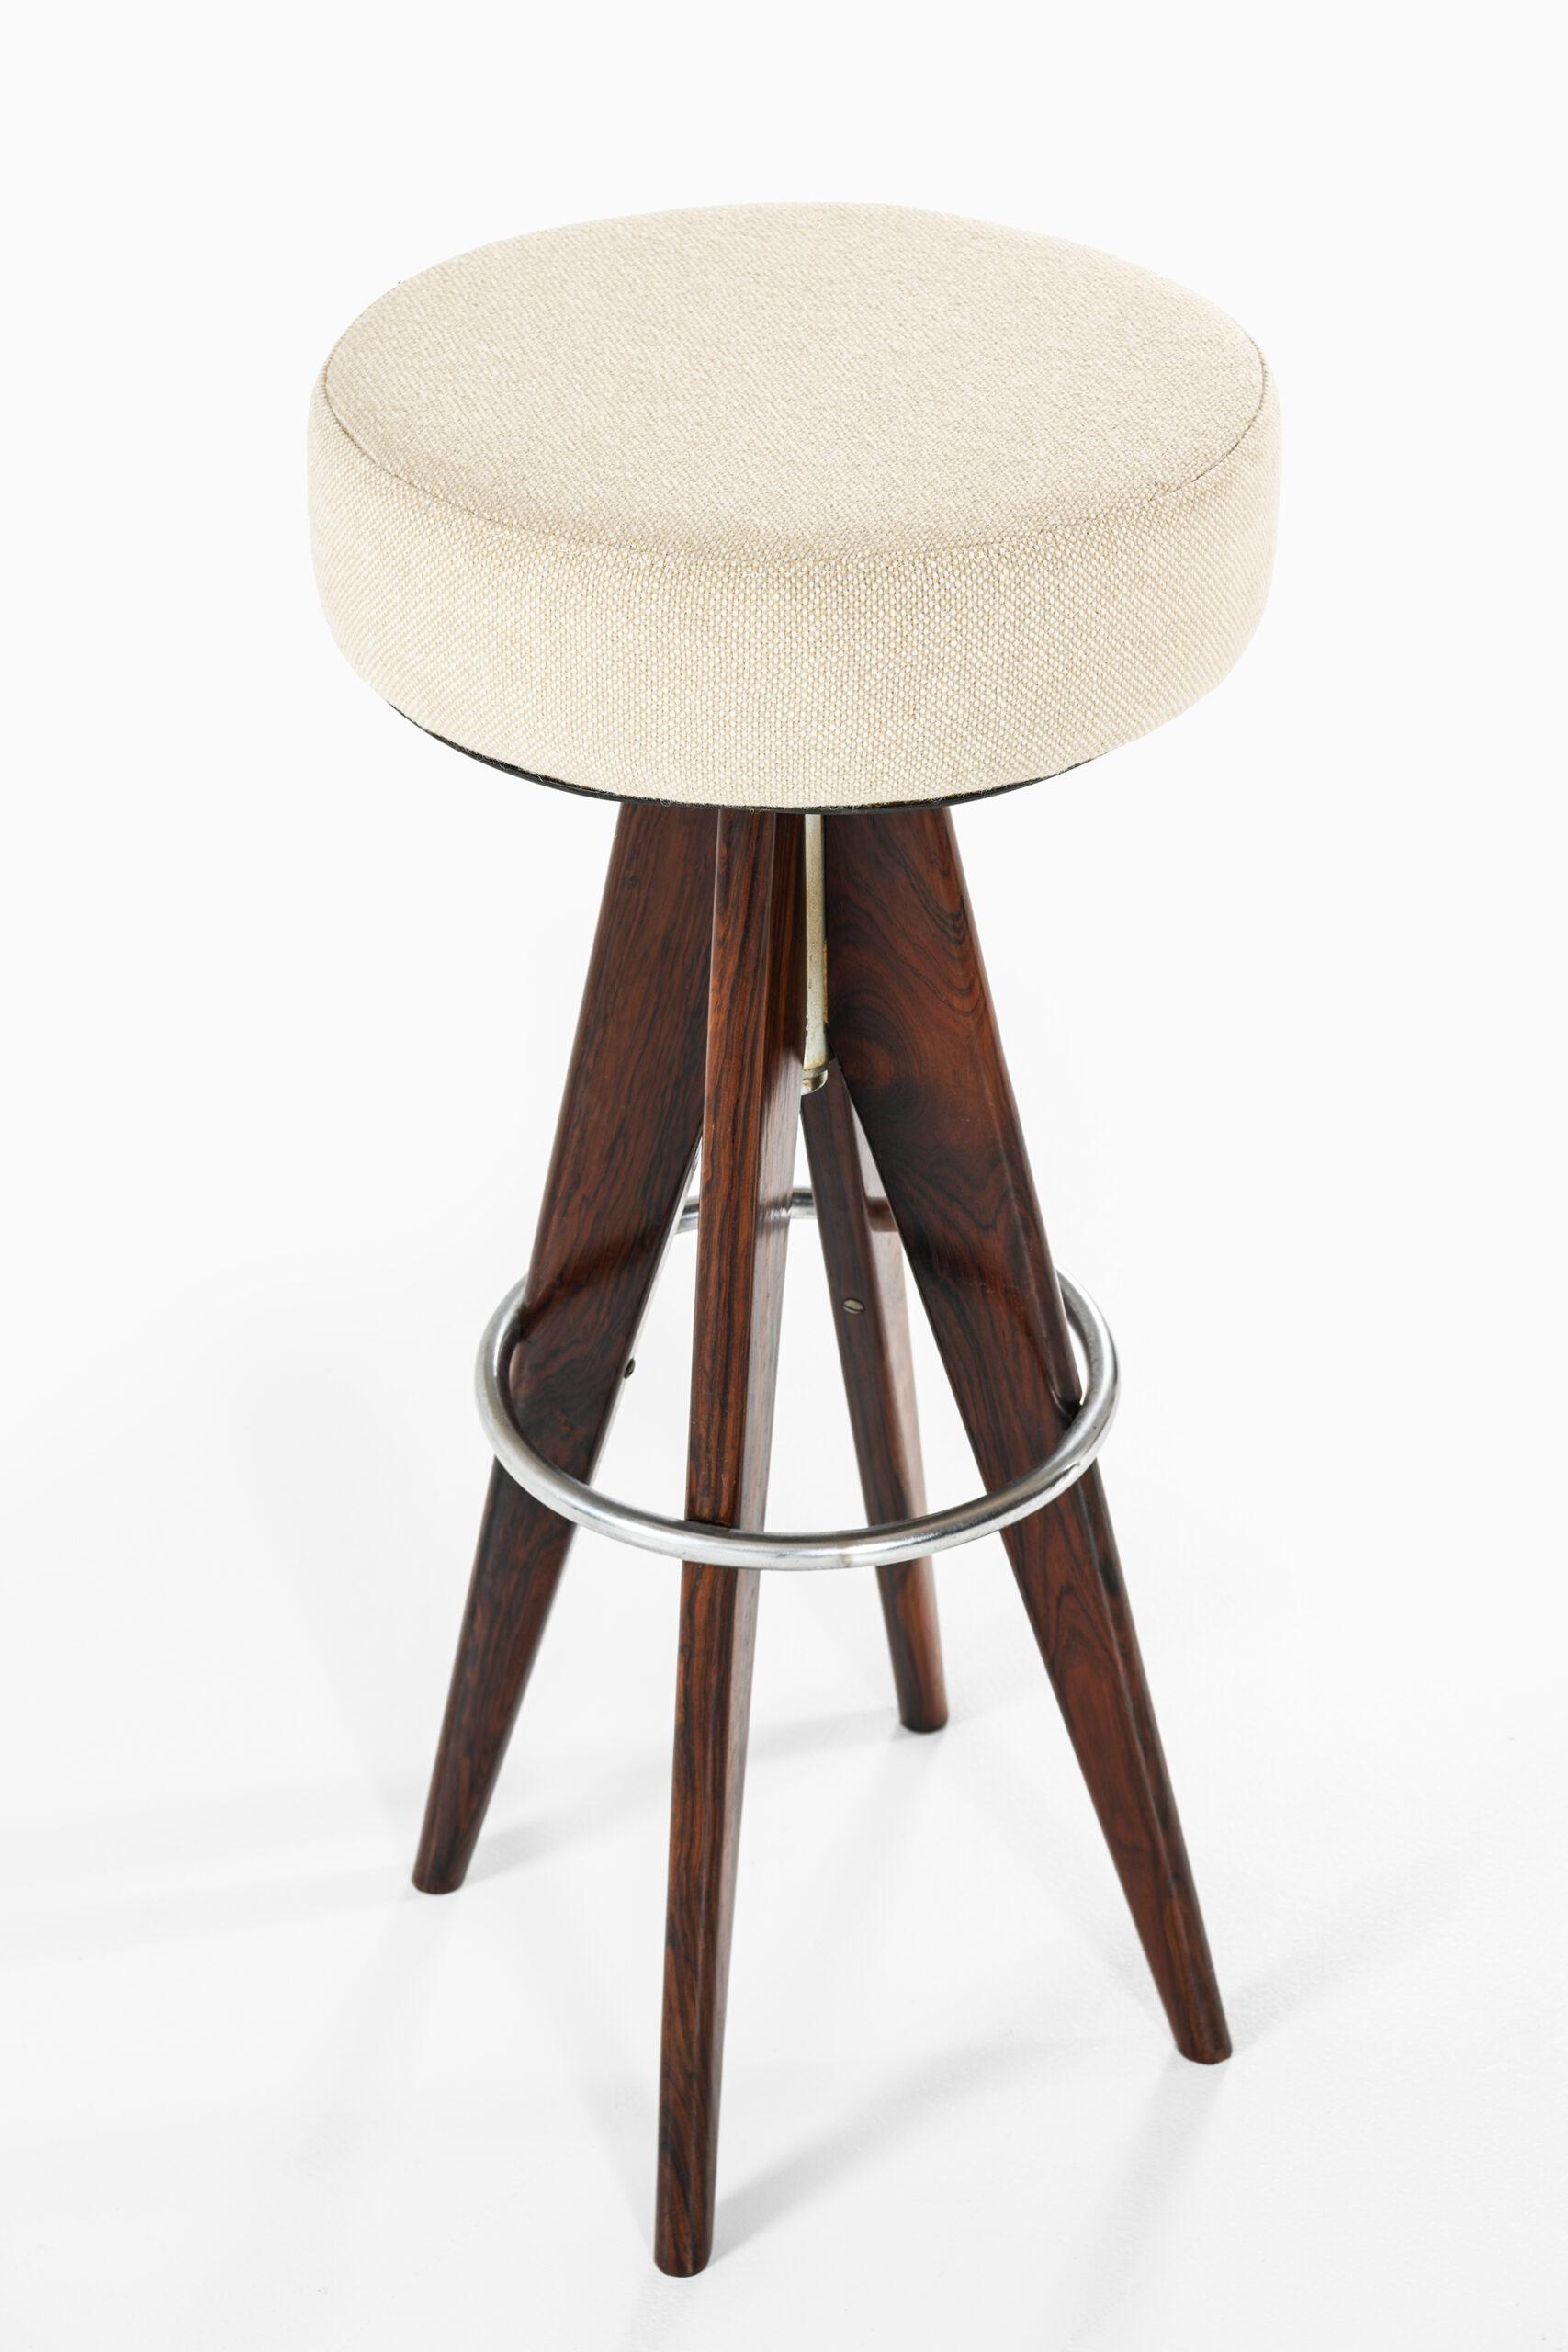 Very rare bar stools designed by Arne Hovmand-Olsen. Produced in Denmark. Price listed is / item.